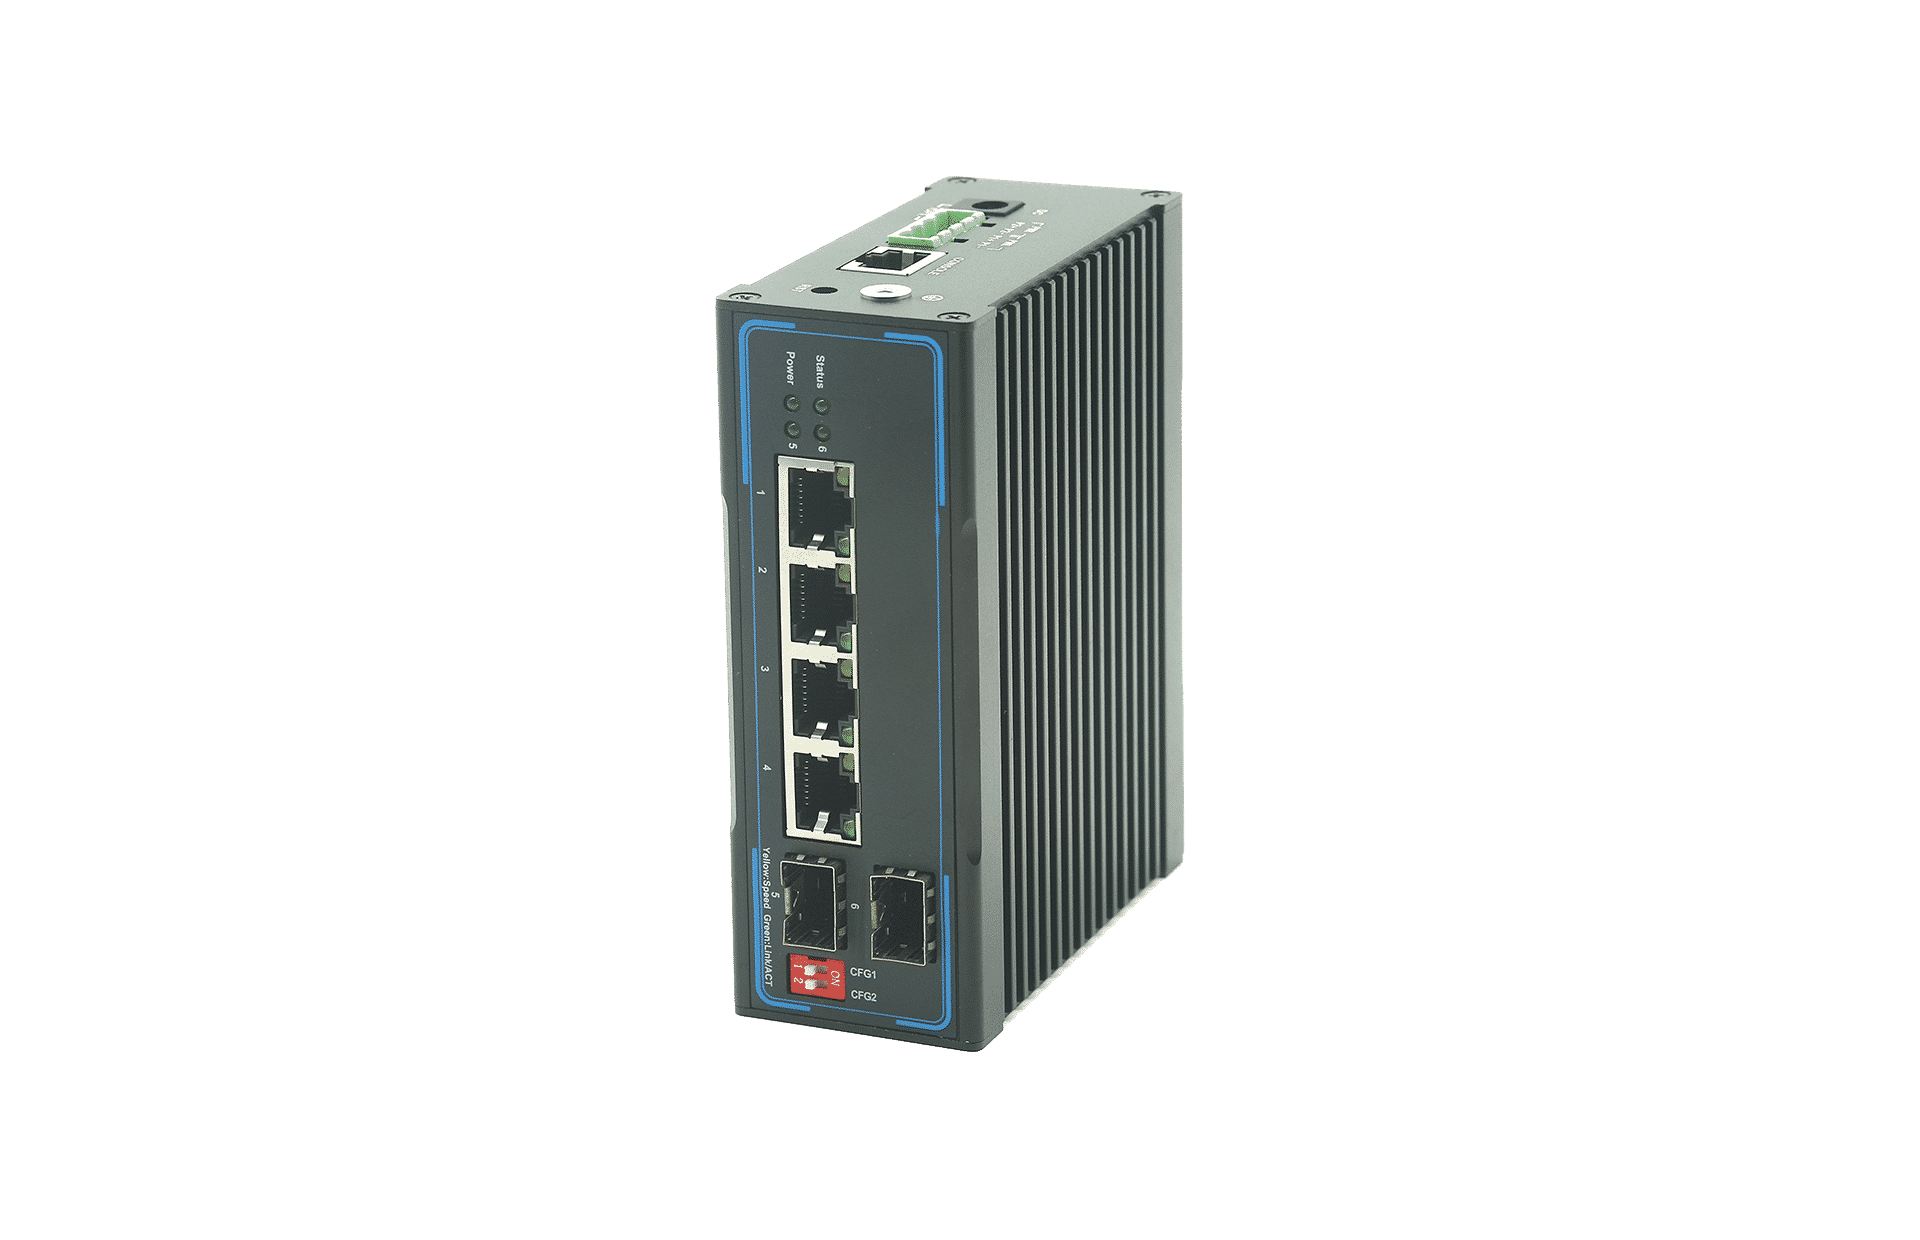 4 Ports 10/100/1000Mbps RJ45 and 2 Gigabit SFP Managed Industrial Switch